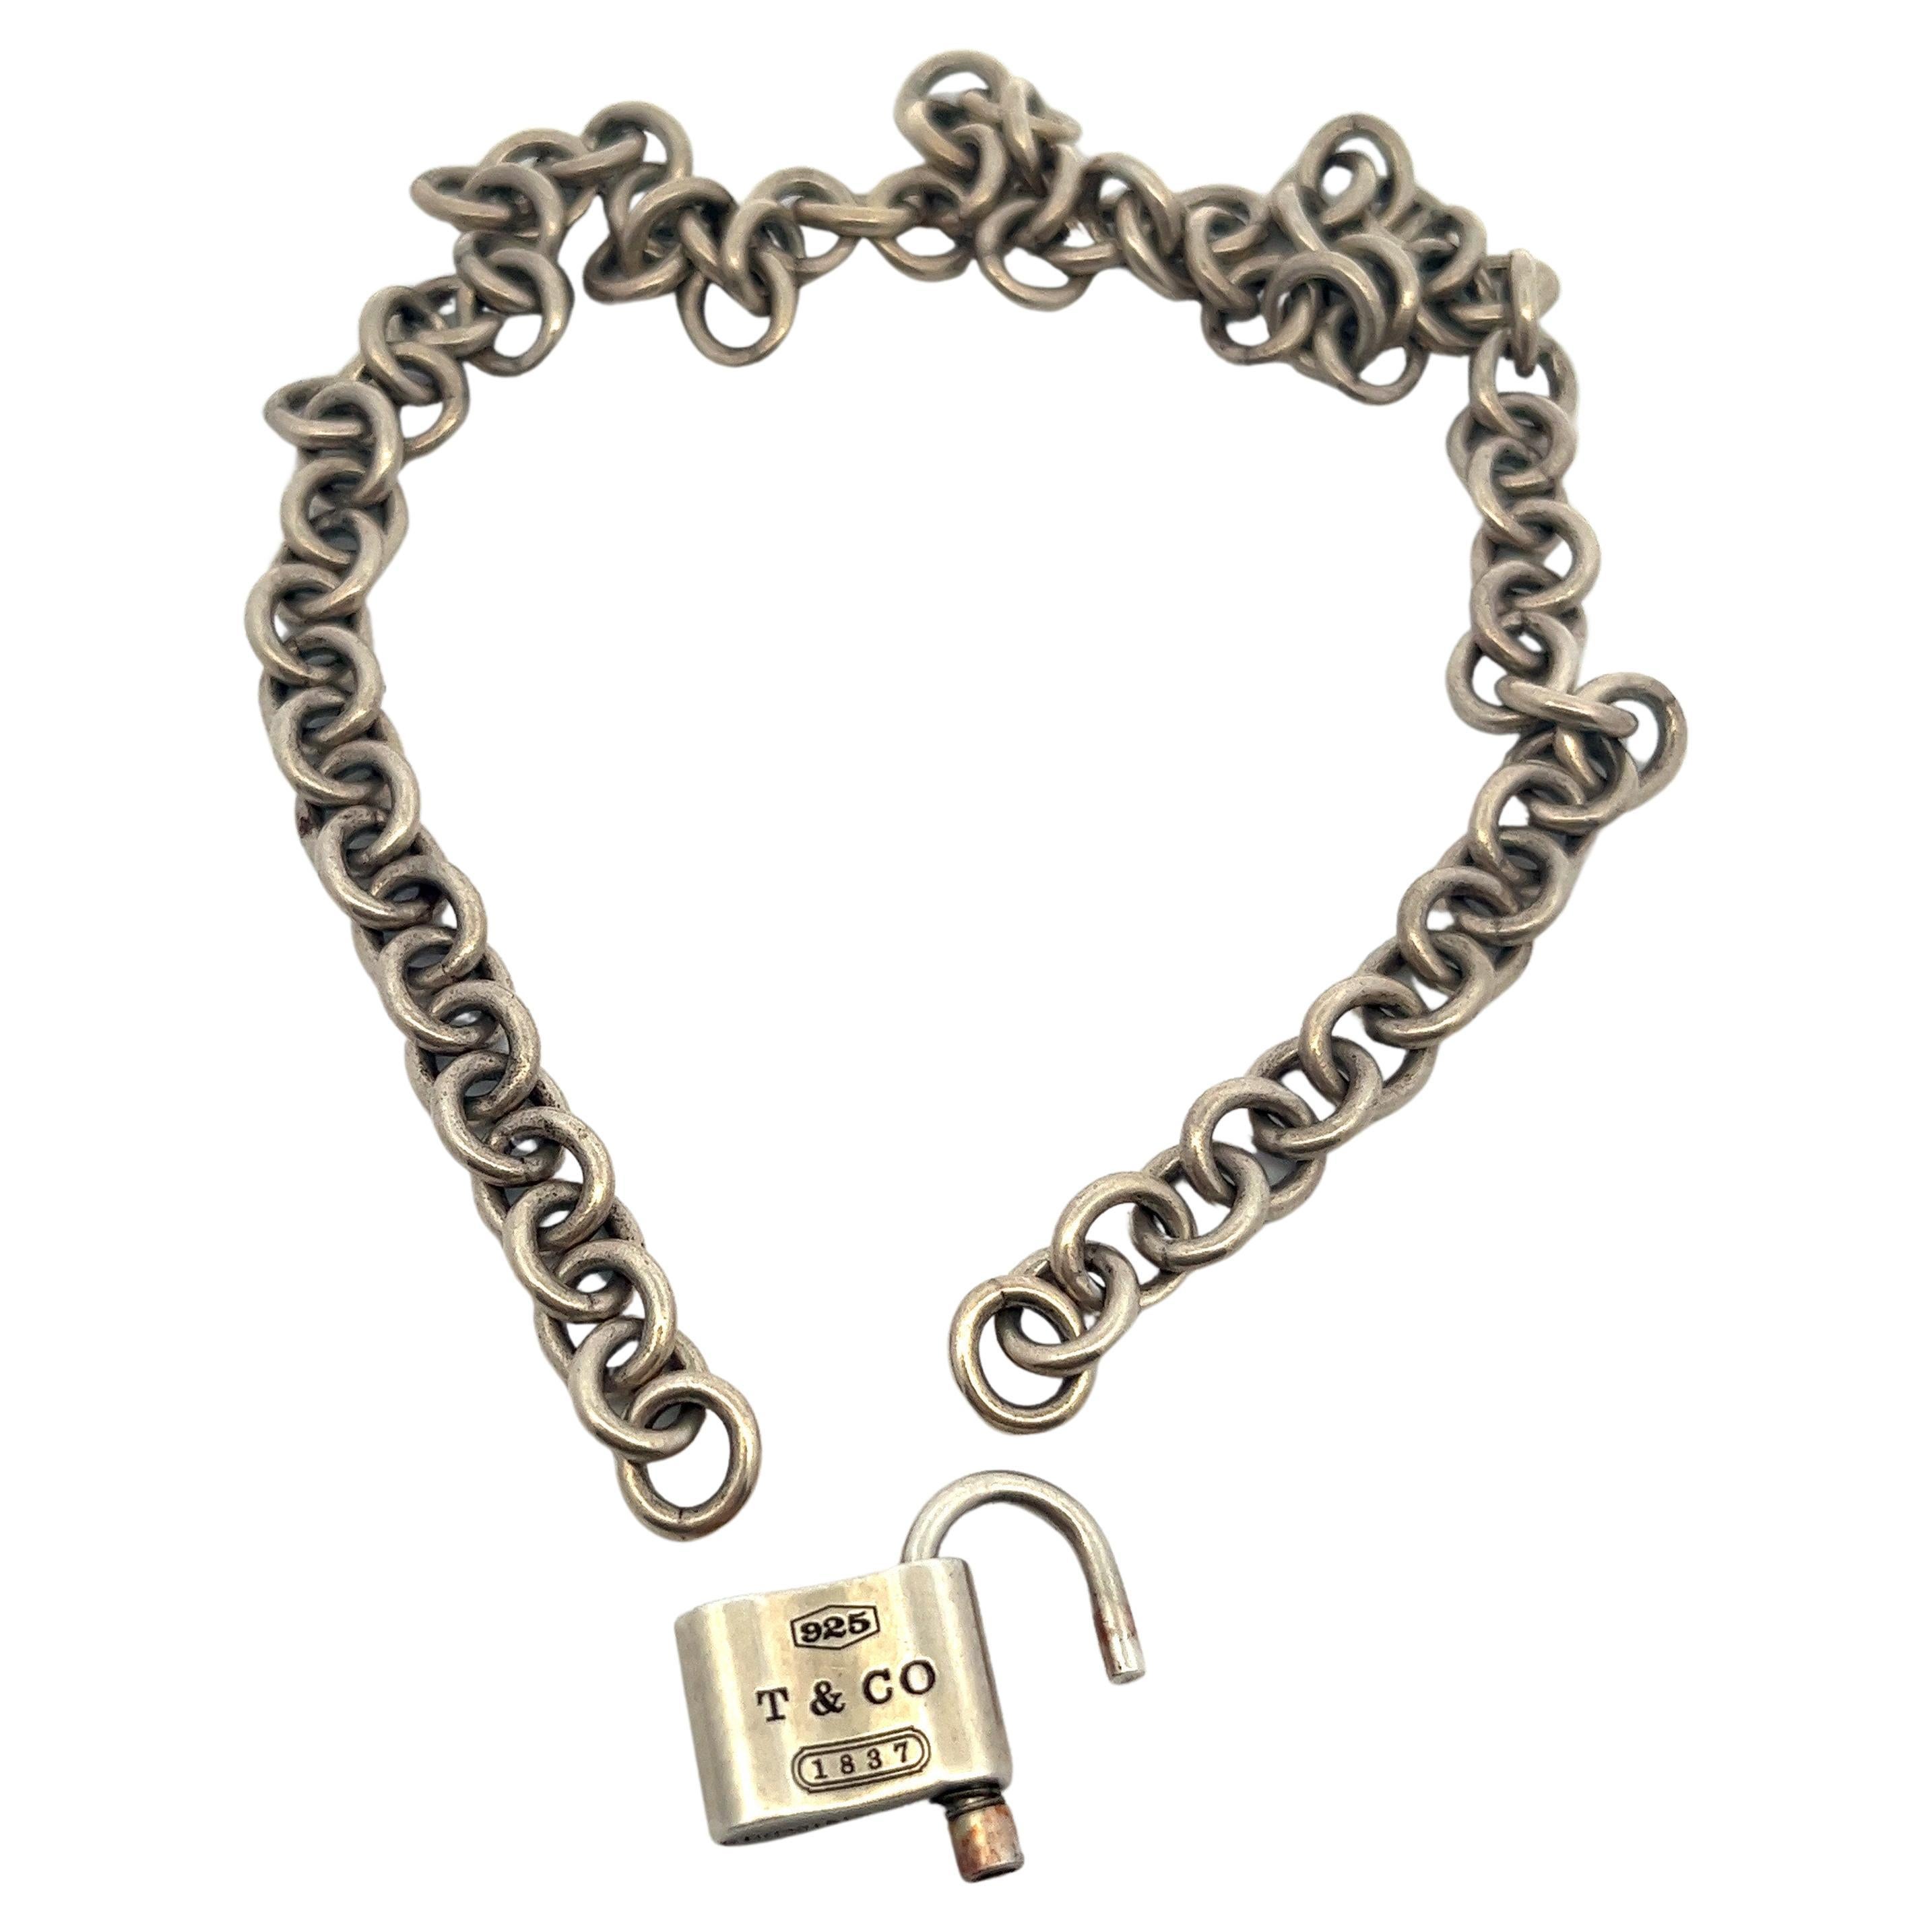 100% authentic Tiffany & Co. 1837 Lock Pendant Necklace. 

Elegantly crafted, the Tiffany & Co. 1837 Lock Pendant Necklace embodies the brand's enduring legacy. The functional lock, stamped 